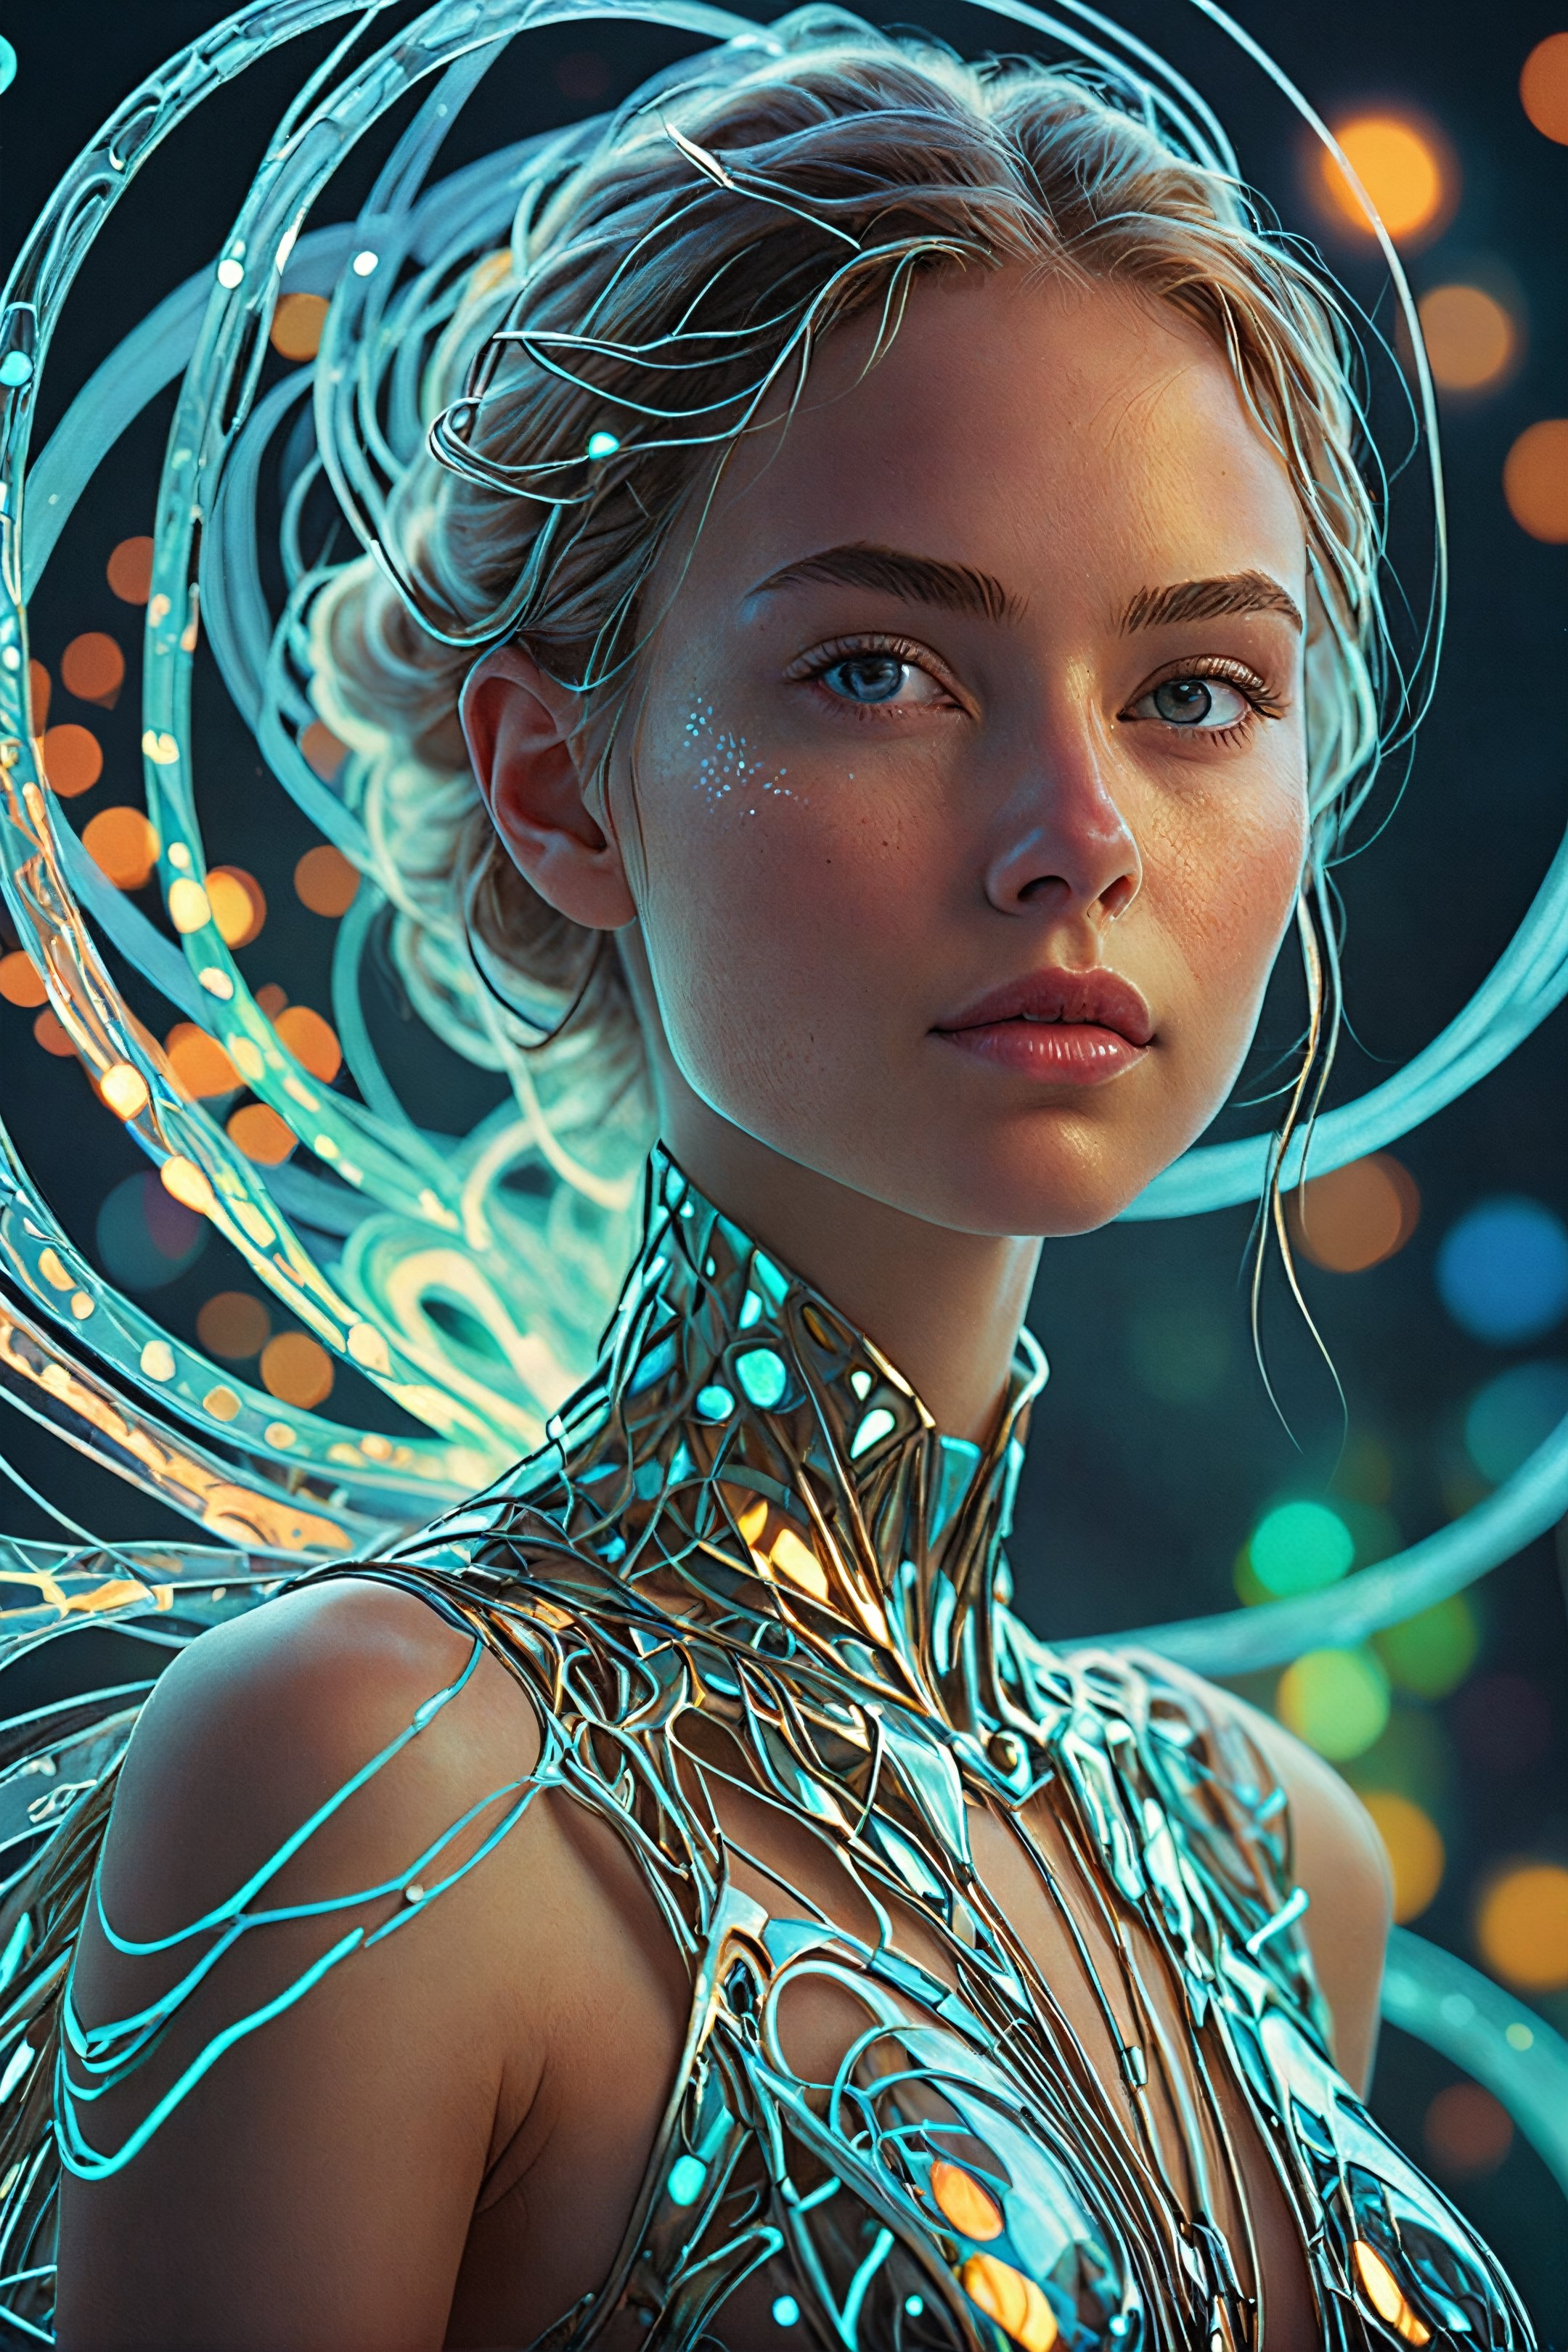 Highly detailed illustration of a young female with asymmetrical, harmonious features that strike a perfect balance between strength and delicacy, ((seamless interaction with the elements)), ((strong environmental light), (futuristic dreamscape), (cybernetic realms), celestial glow emanating softly, physical and ethereal form, sinuous elegance, kaleidoscopic hues of possibility, portray a realm where the enigmatic convergence of serenity and chaos unfolds, floats gracefully, exuding an otherworldly aura mystical glow, radiating a gentle and comforting light, bioluminescent glowing, playful body manipulations, divine proportion, non-douche smile, gaze into the camera, holographic shimmer, whimsical lighting, enchanted ambiance, soft textures, imaginative artwork, ethereal glow, silent Luminescence, whispering Silent, iridescent Encounter, vibrant background, by Skyrn99, full body, (((rule of thirds))), high quality, high detail, high resolution, (bokeh:2), backlight, long exposure:2
